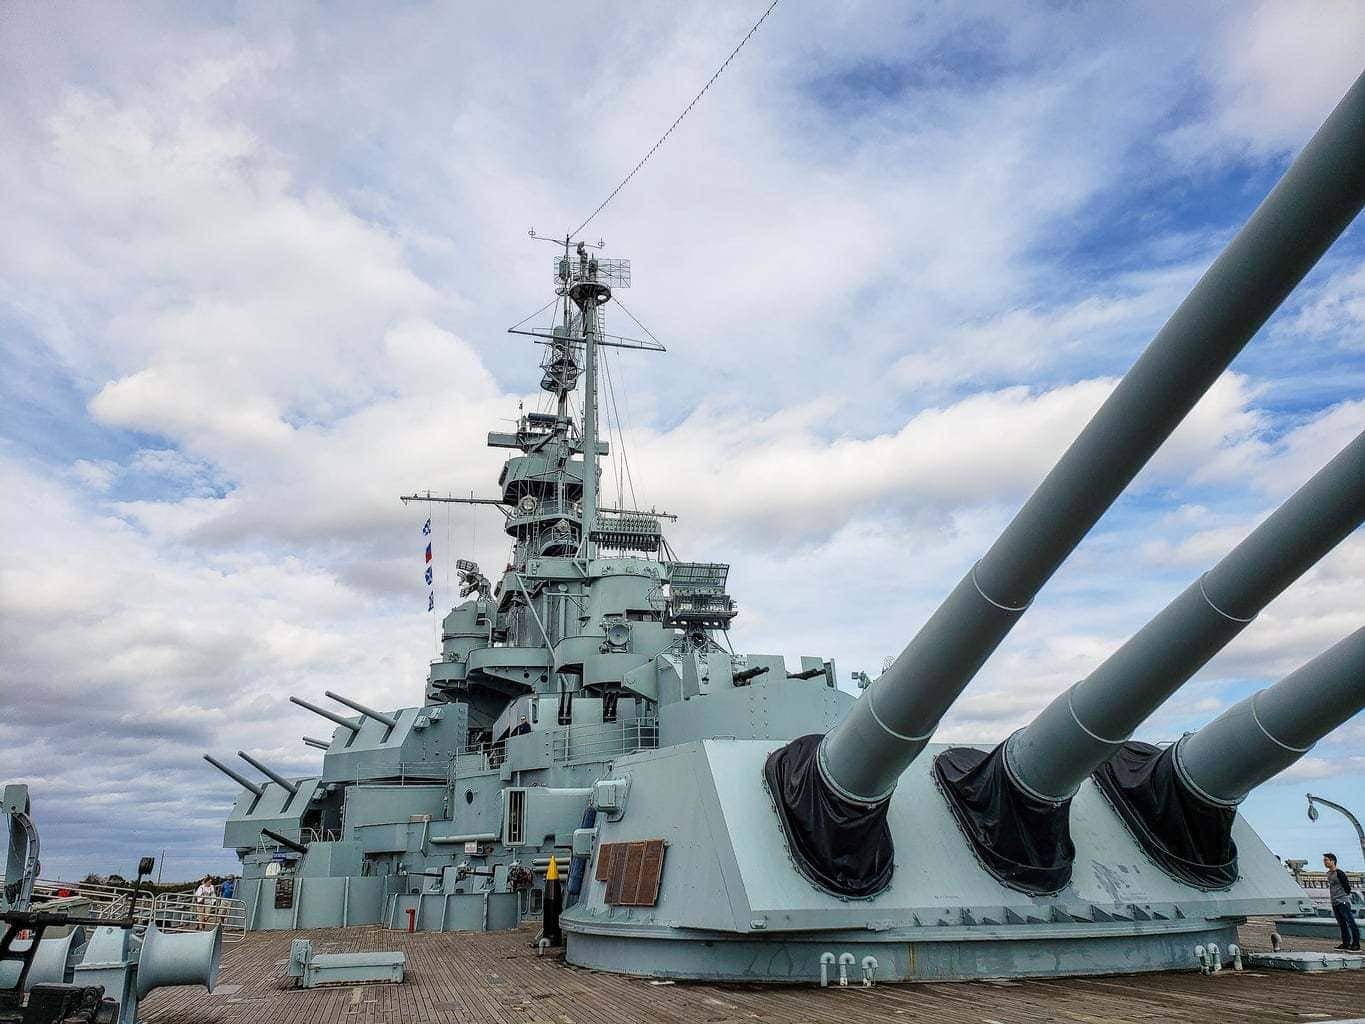 The visit to the USS Alabama Battleship Memorial was one of our favorites. Nicknamed the "Mighty A", you and your family can spend several hours learning about and exploring the inside of the USS ALABAMA Battleship.